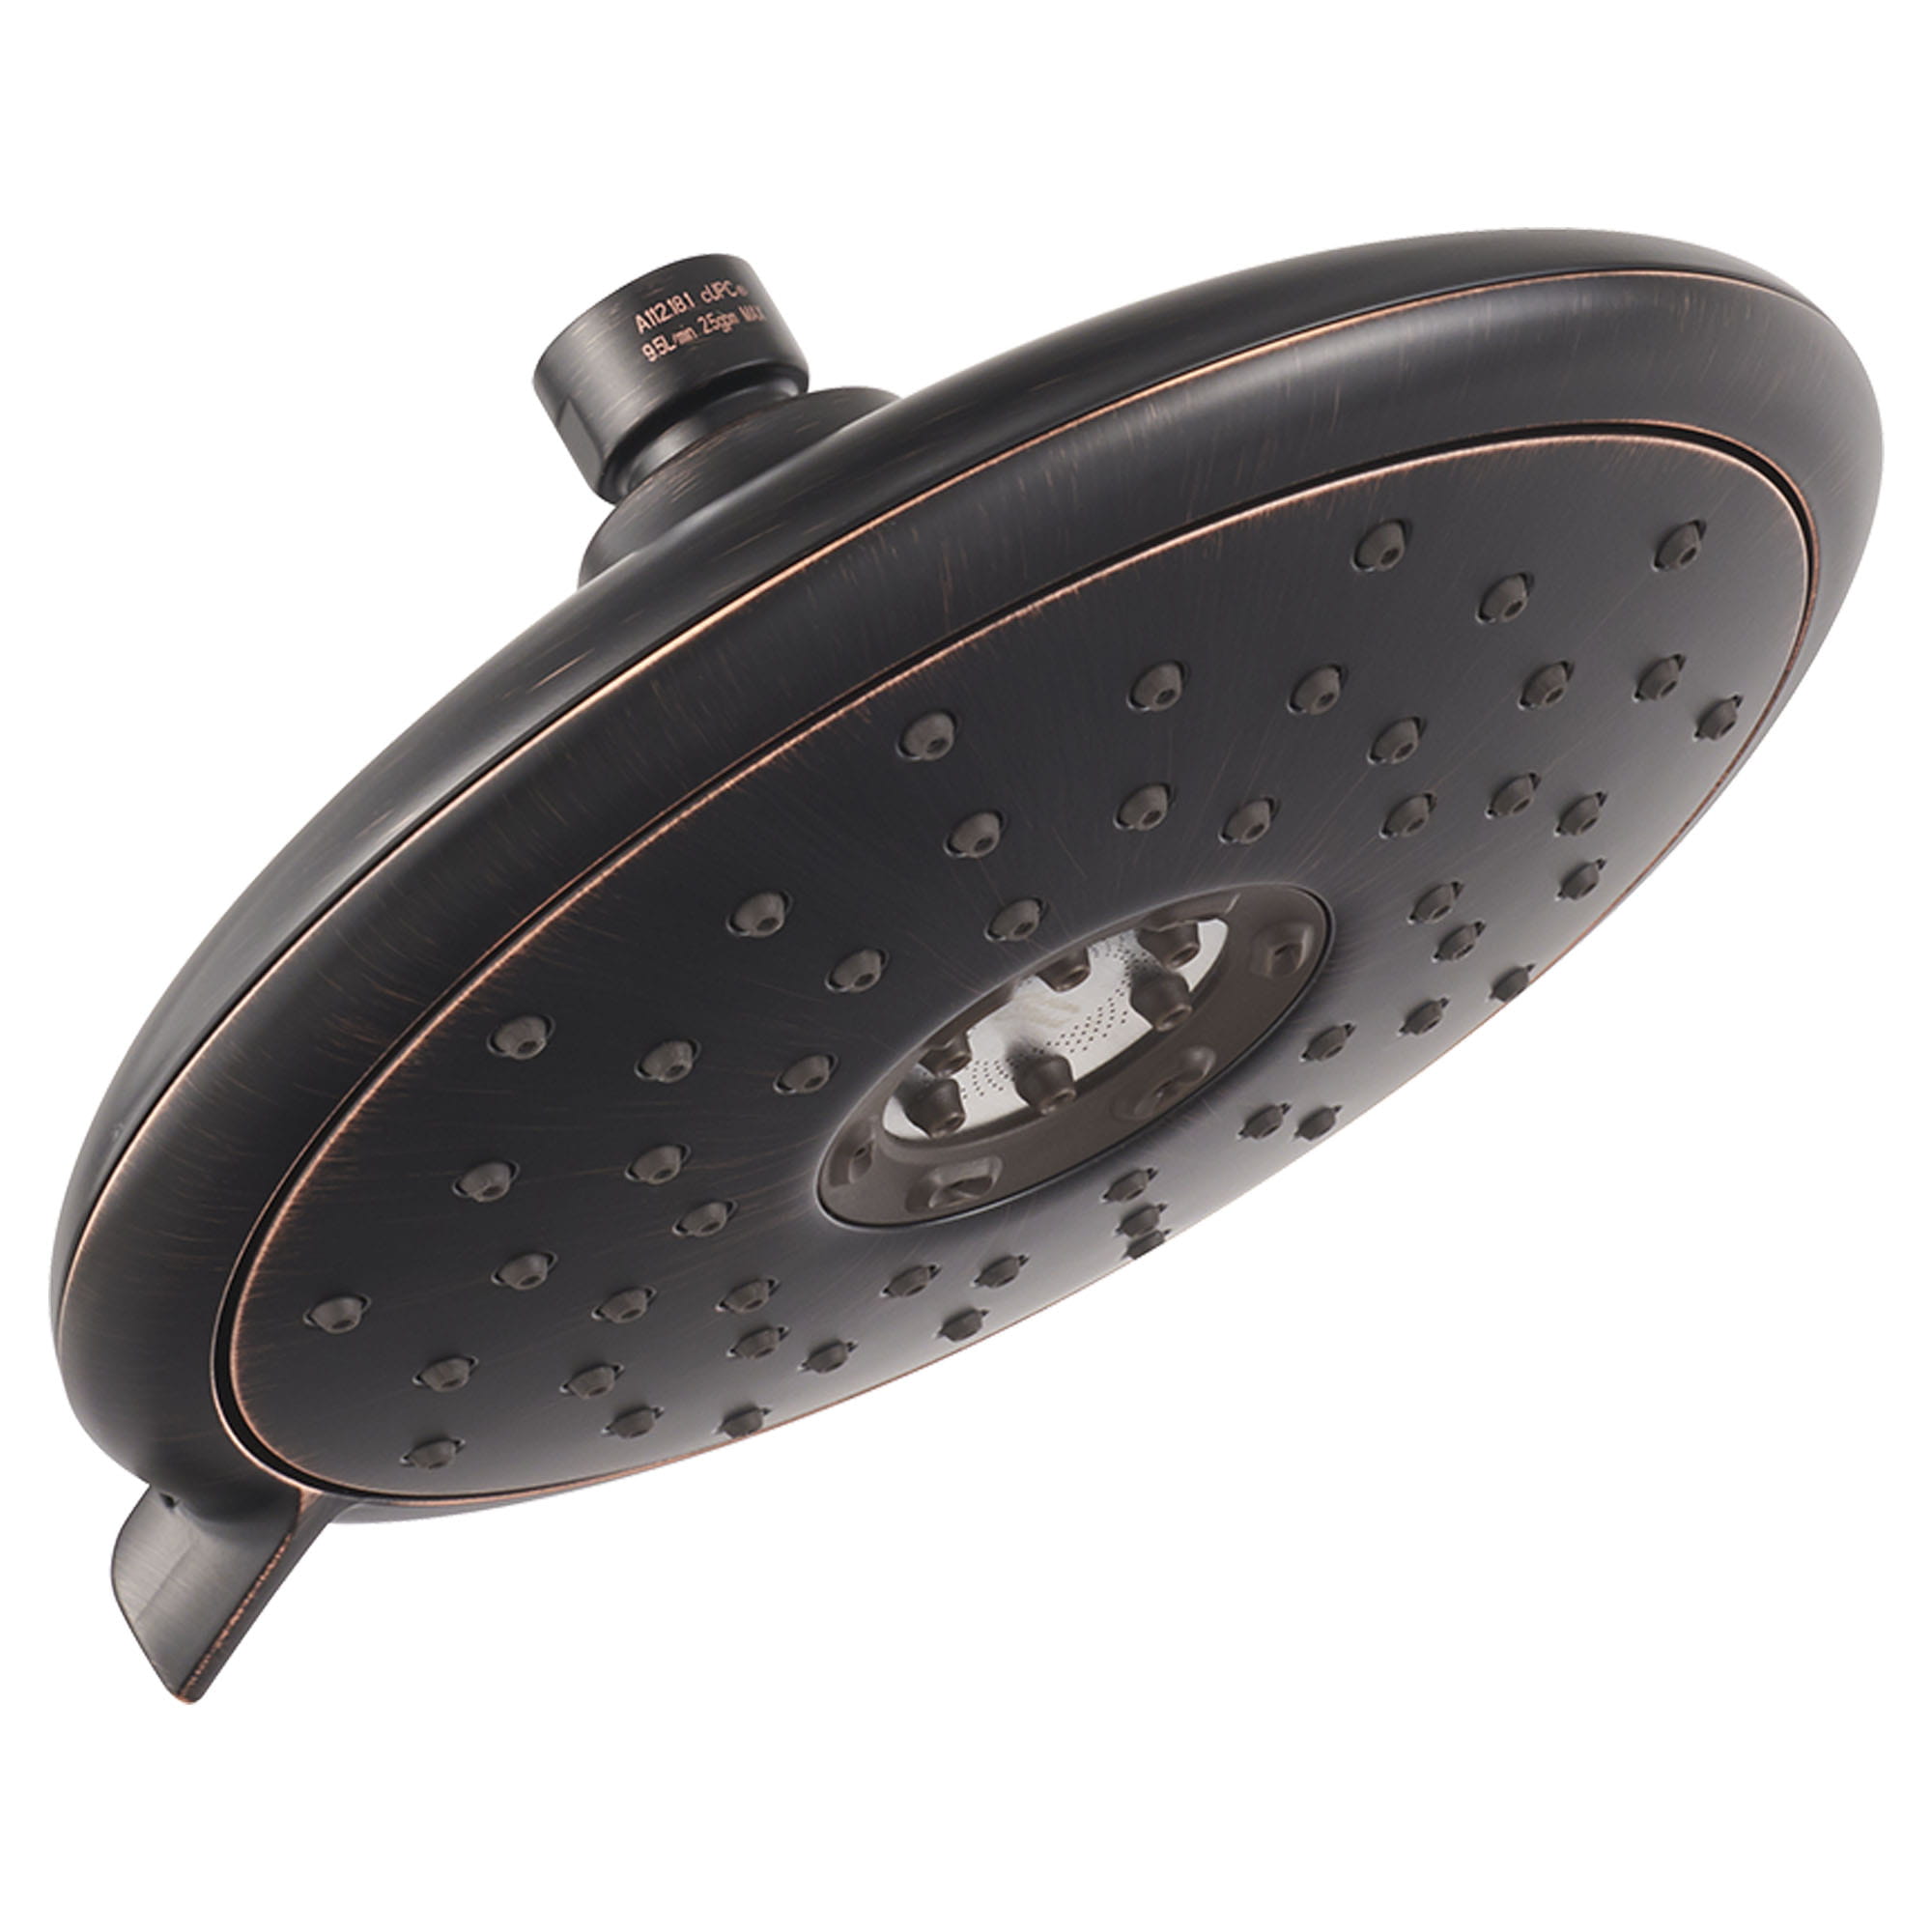 Spectra® Fixed 7-Inch 1.8 gpm/6.8 L/
min Fixed Showerhead